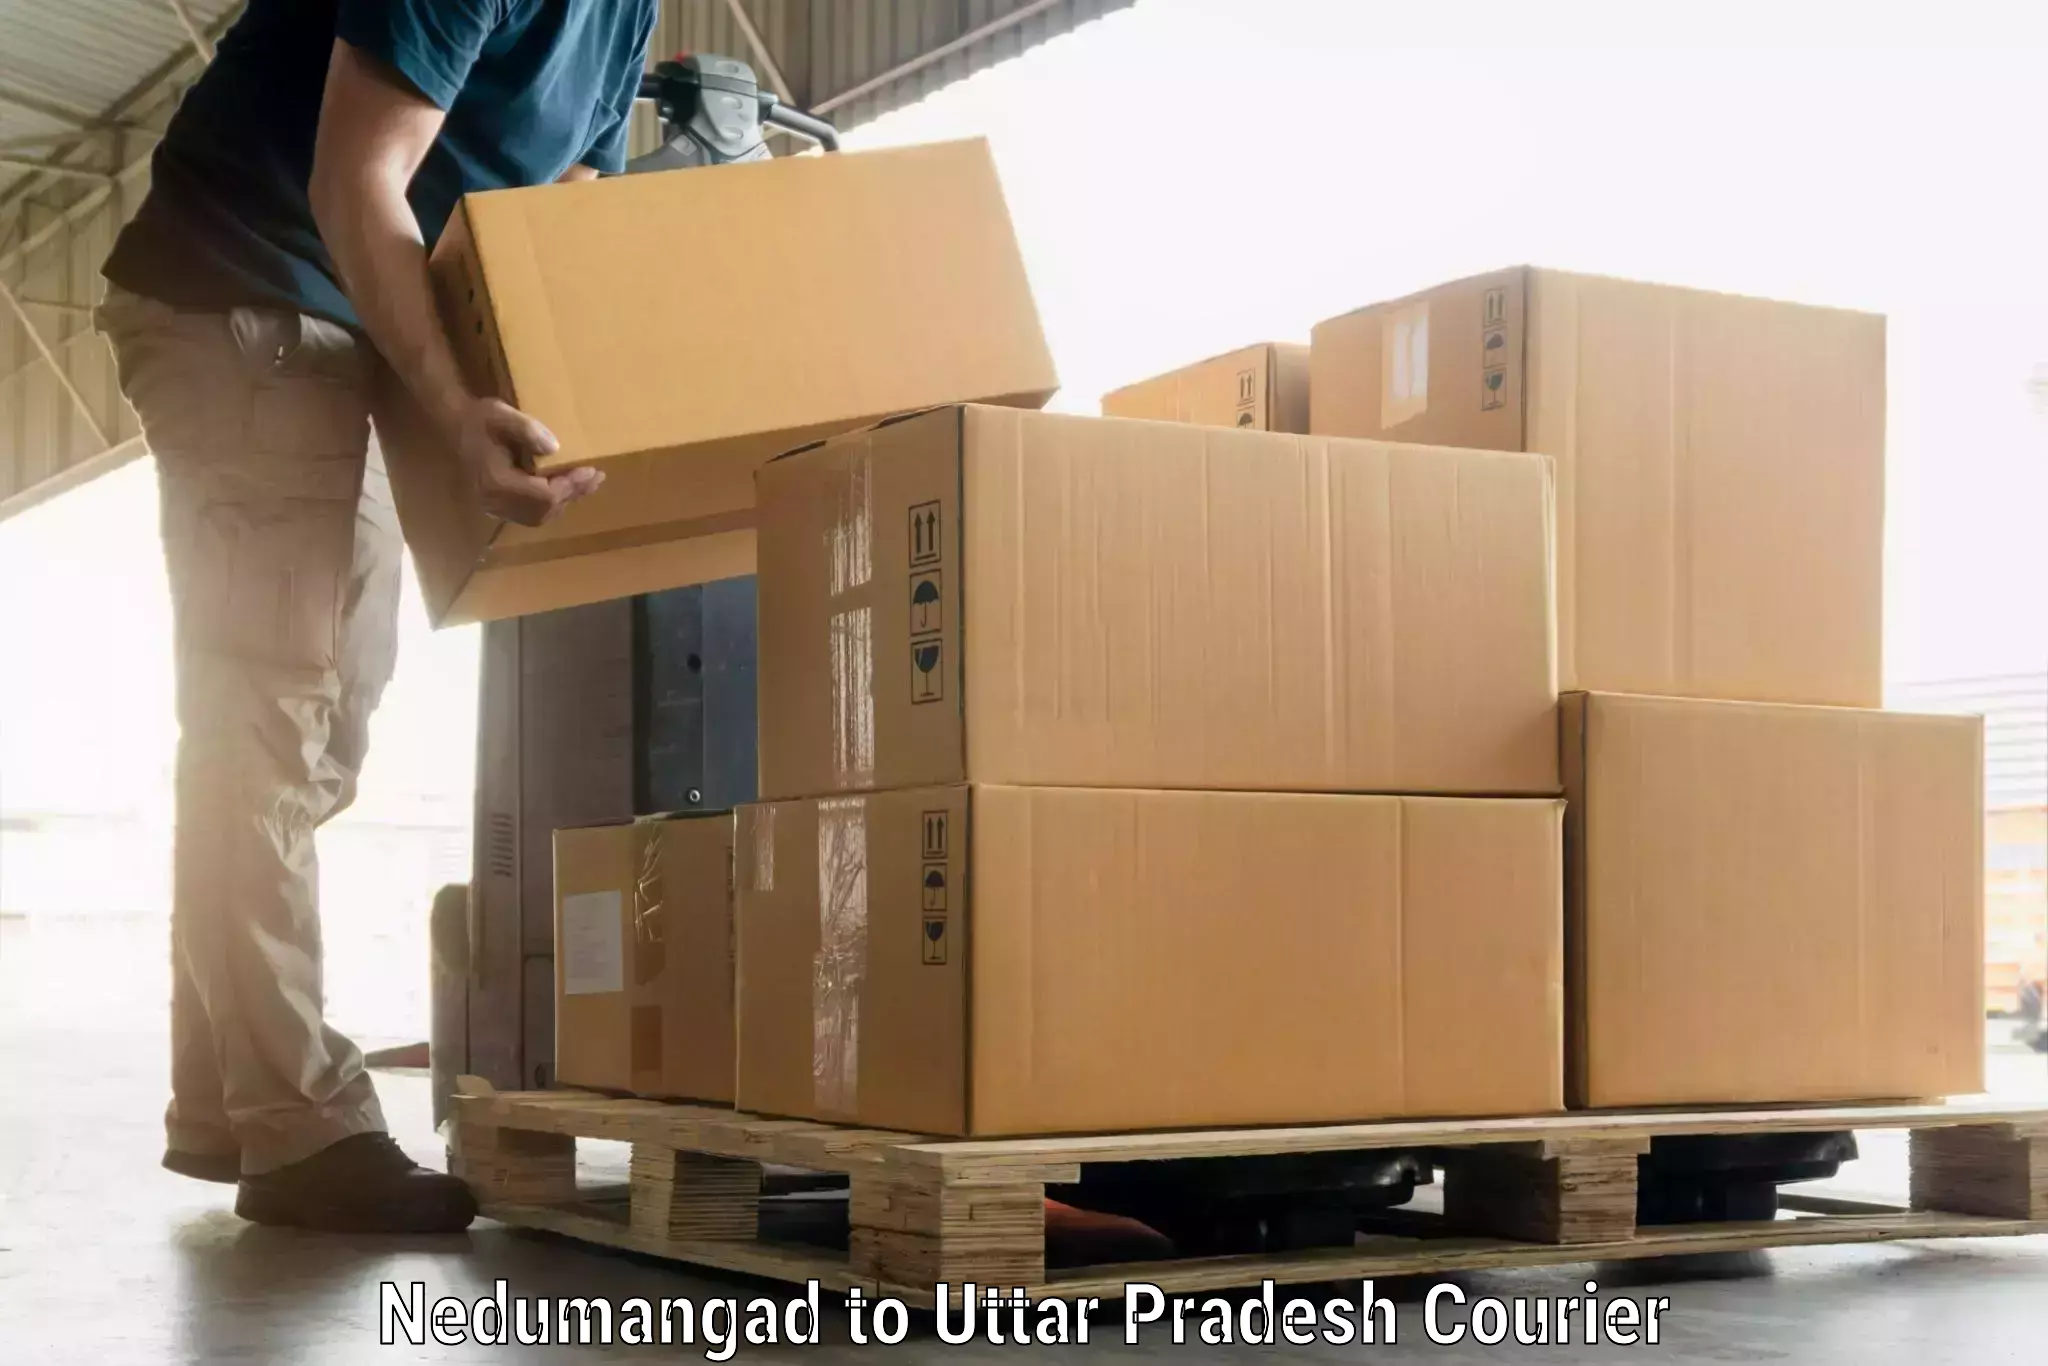 Baggage delivery estimate in Nedumangad to Aligarh